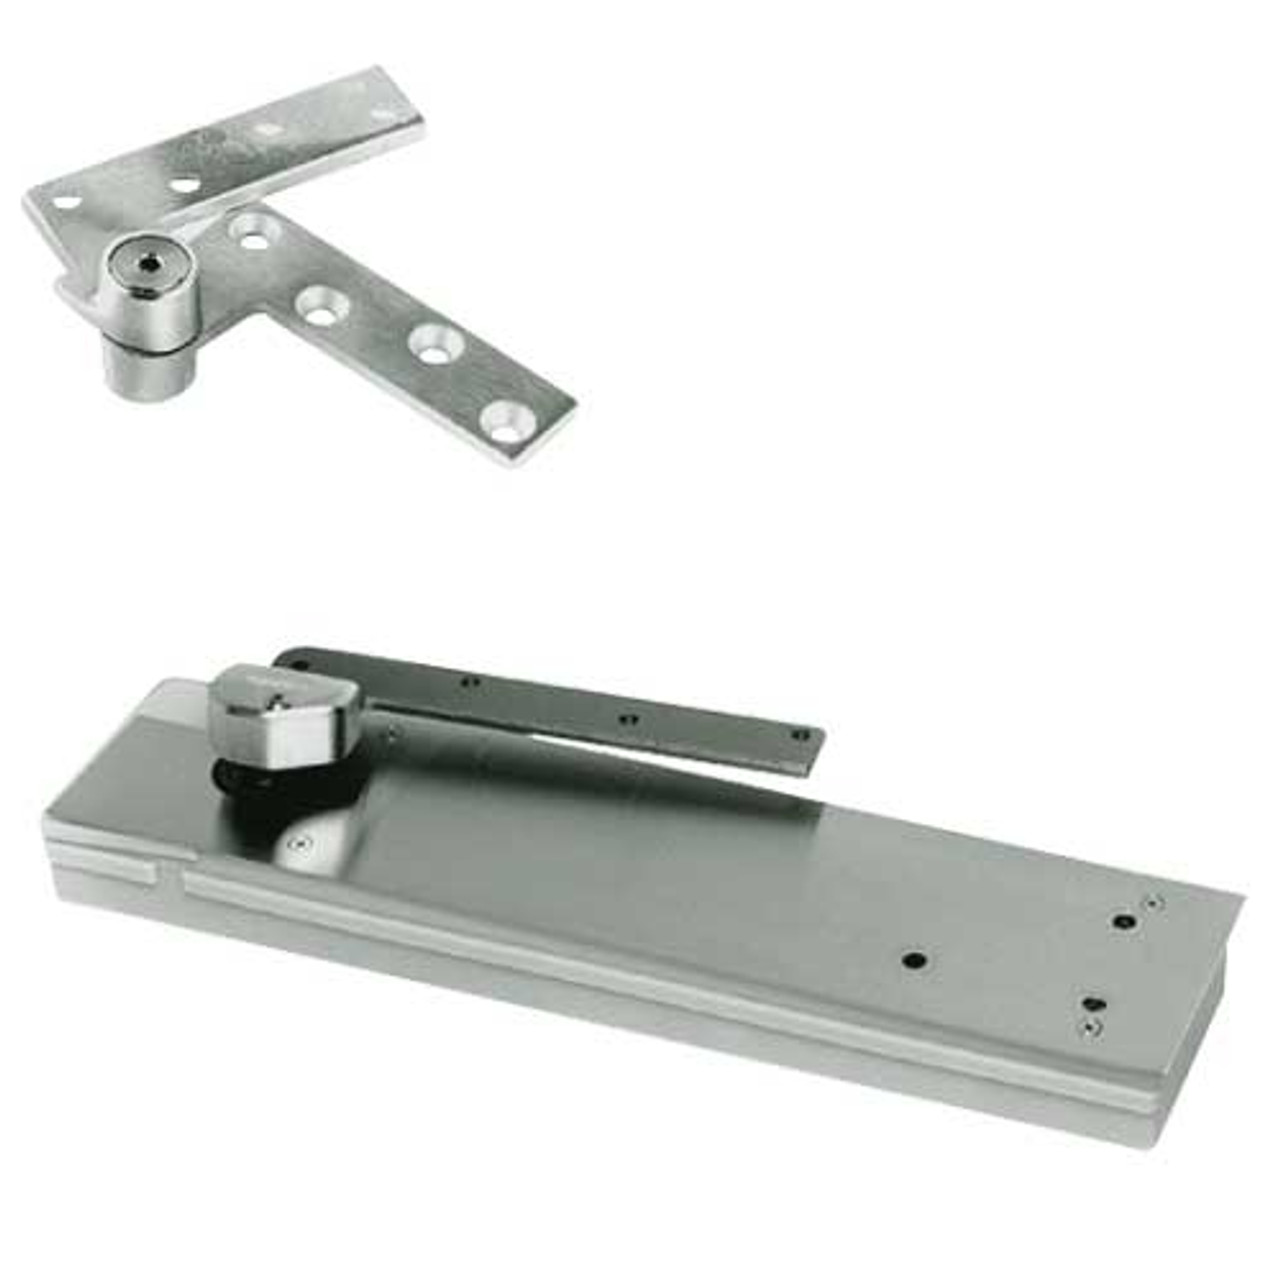 5105ABC90-1-1/2OS-LH-619 Rixson 51 Series 1-1/2" Offset Hung Shallow Depth Floor Closers in Satin Nickel Finish